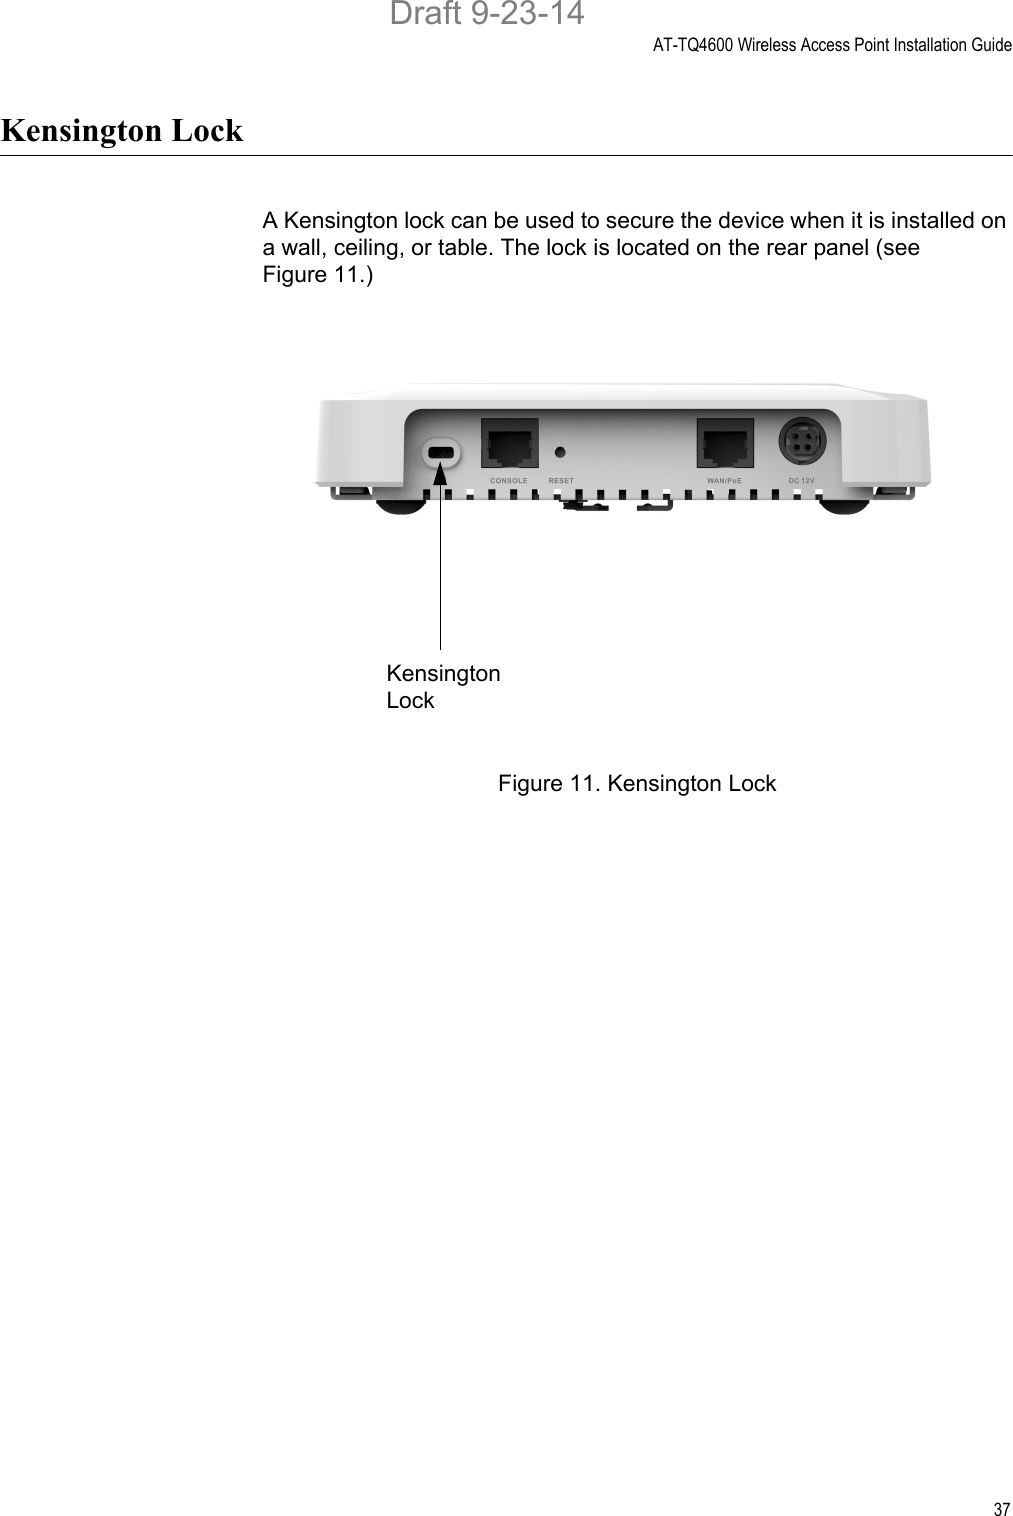 AT-TQ4600 Wireless Access Point Installation Guide37Kensington LockA Kensington lock can be used to secure the device when it is installed on a wall, ceiling, or table. The lock is located on the rear panel (see Figure 11.)Figure 11. Kensington LockKensington LockDraft 9-23-14